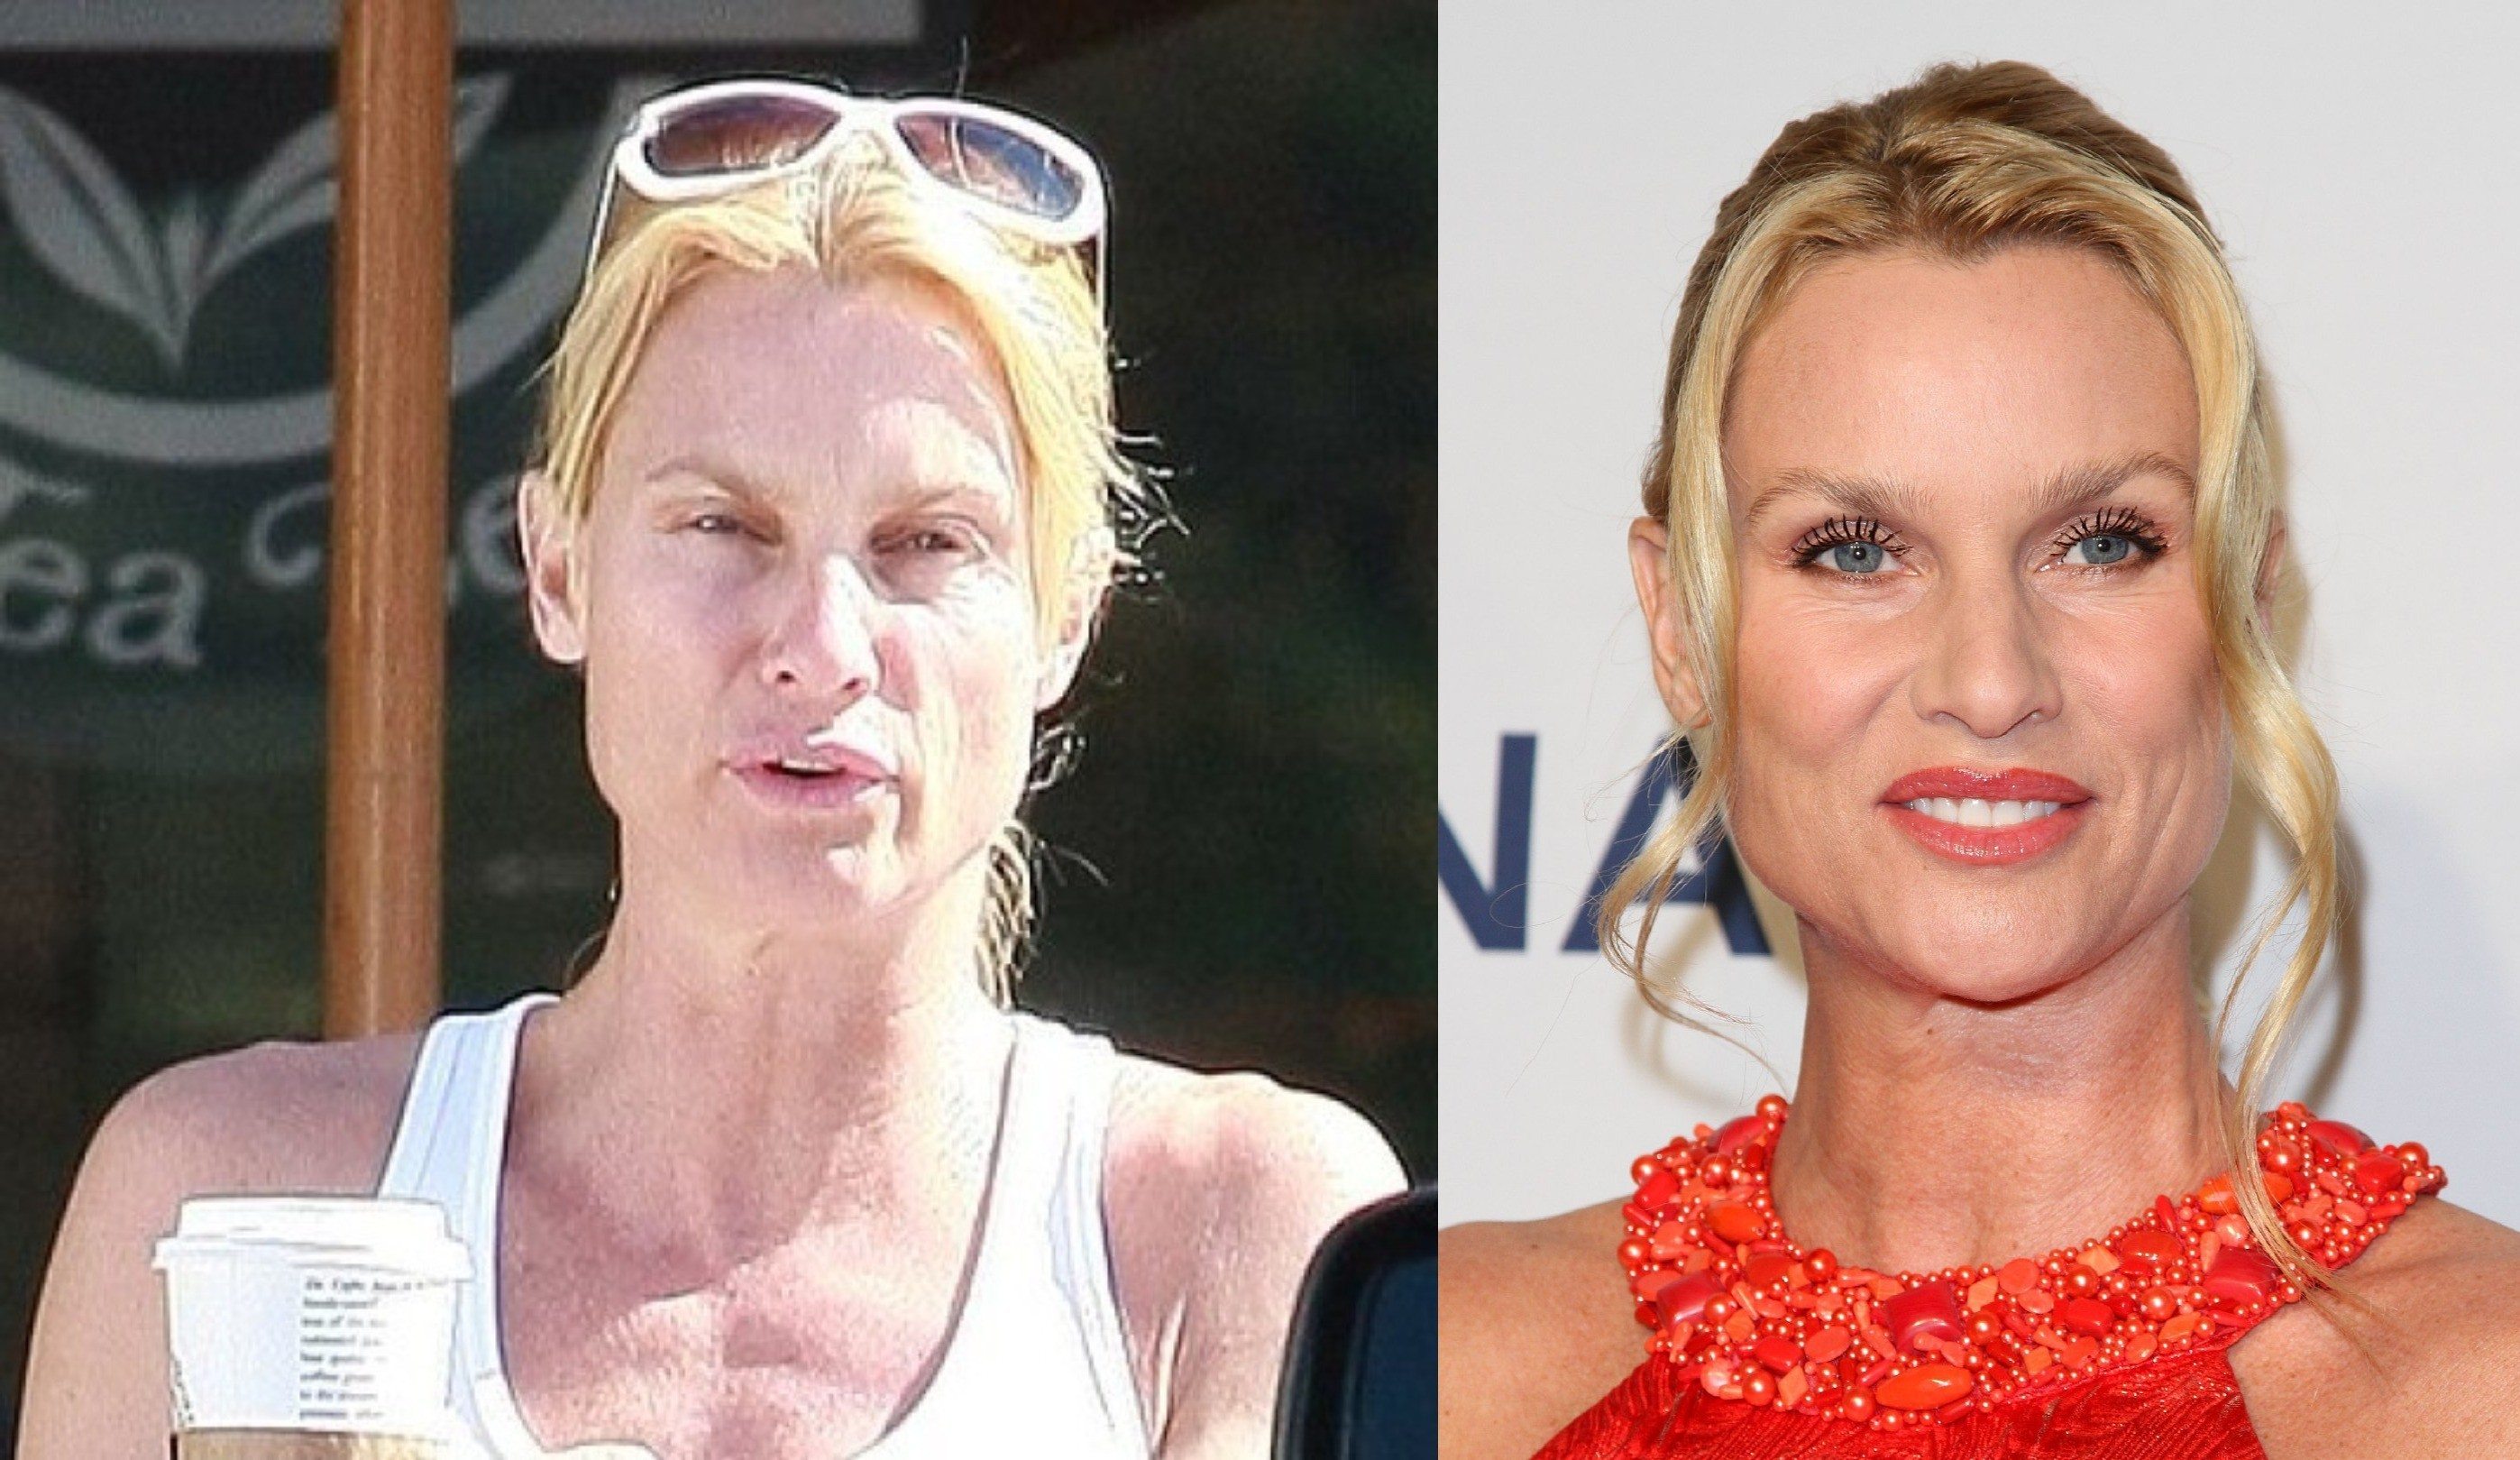 Check Out These 20 Embarrassing Photos of Celebrities Without Makeup